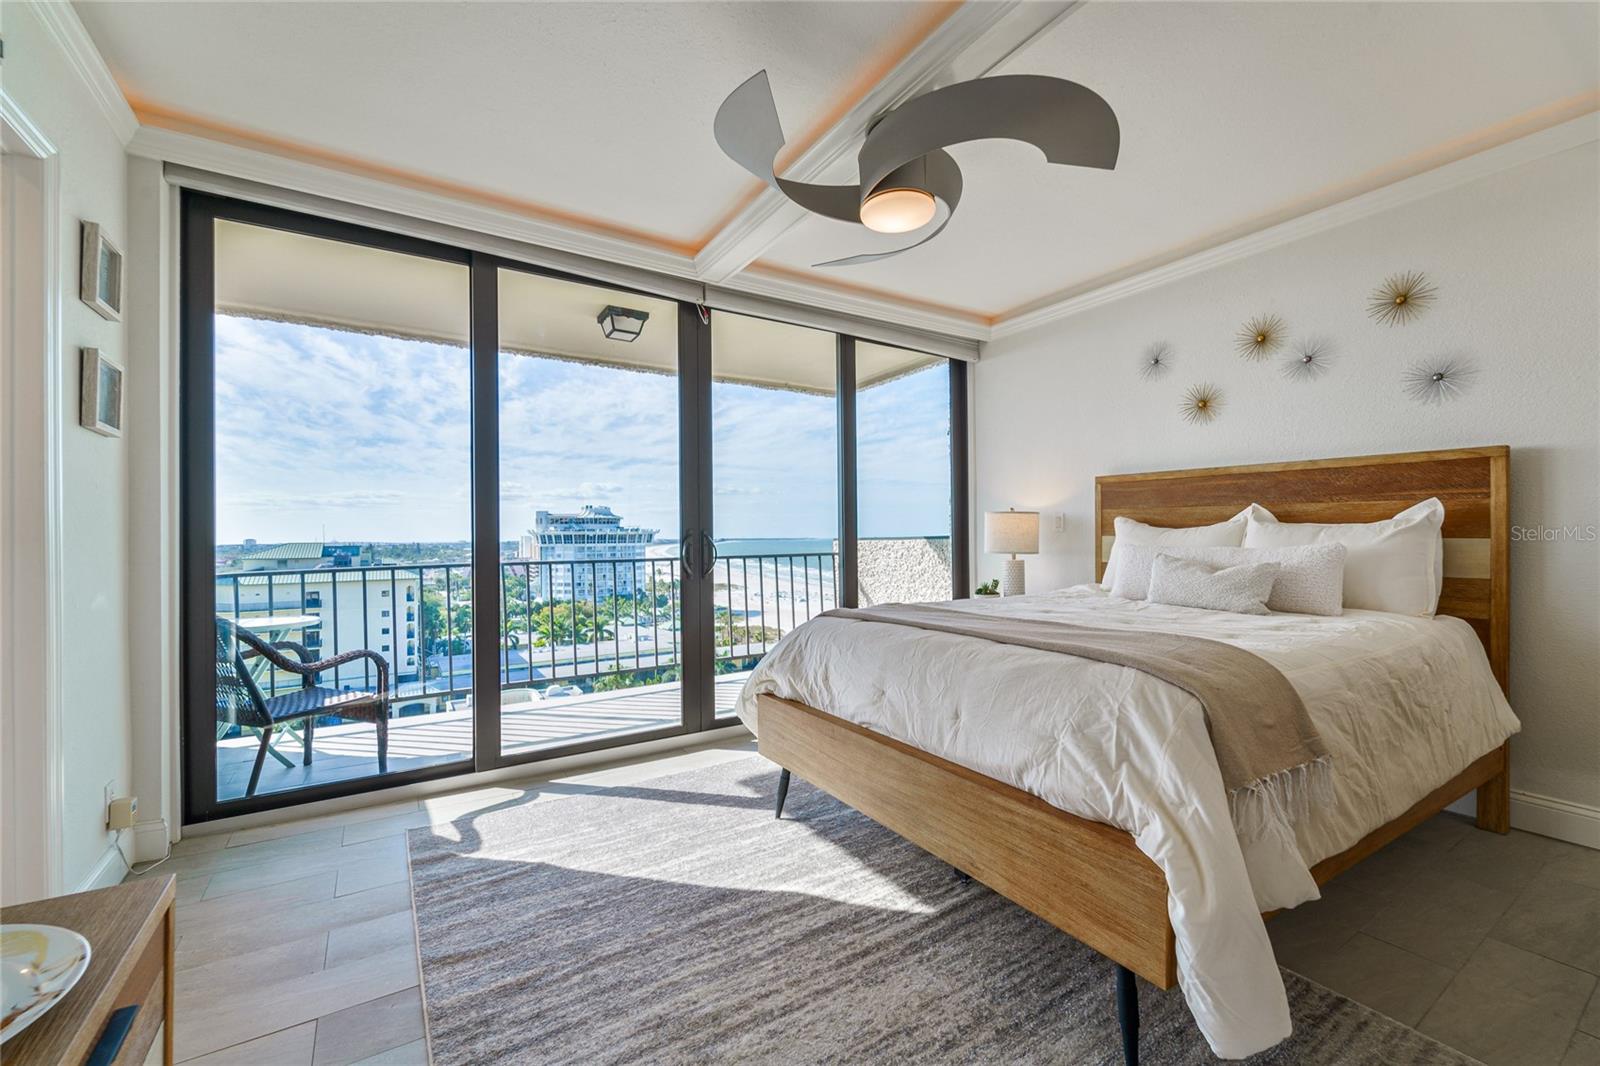 Guest bedroom with balcony facing south. Gorgeous beach & ocean views.